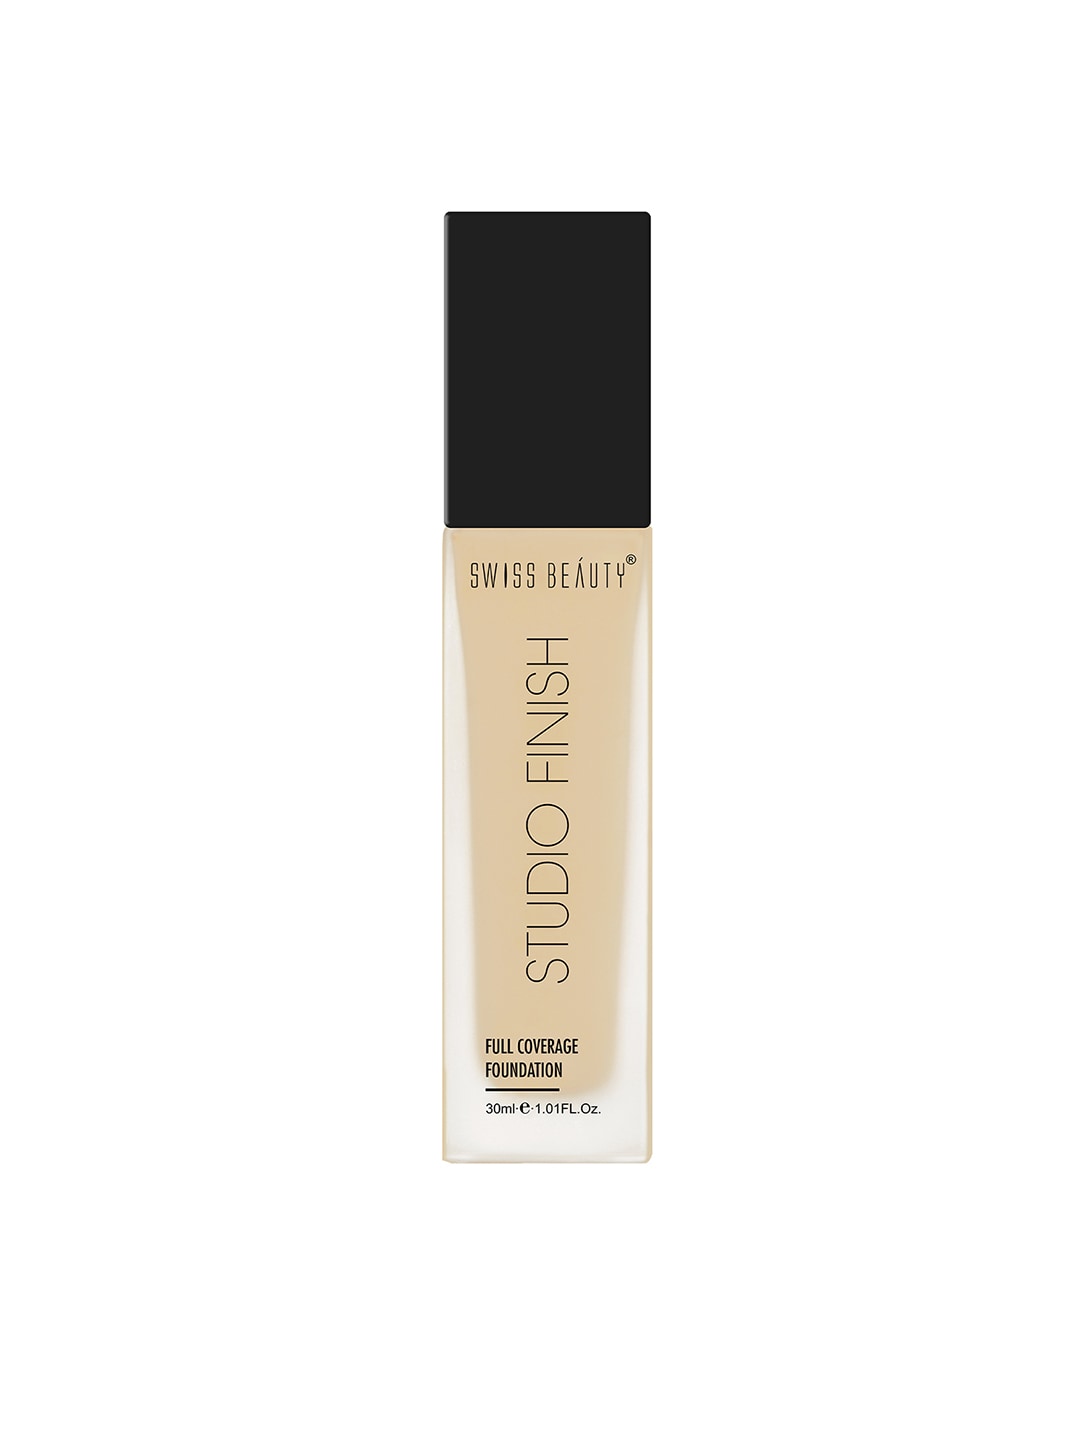 SWISS BEAUTY Studio Finish Full Coverage Foundation - Stand Beige 30 ml Price in India